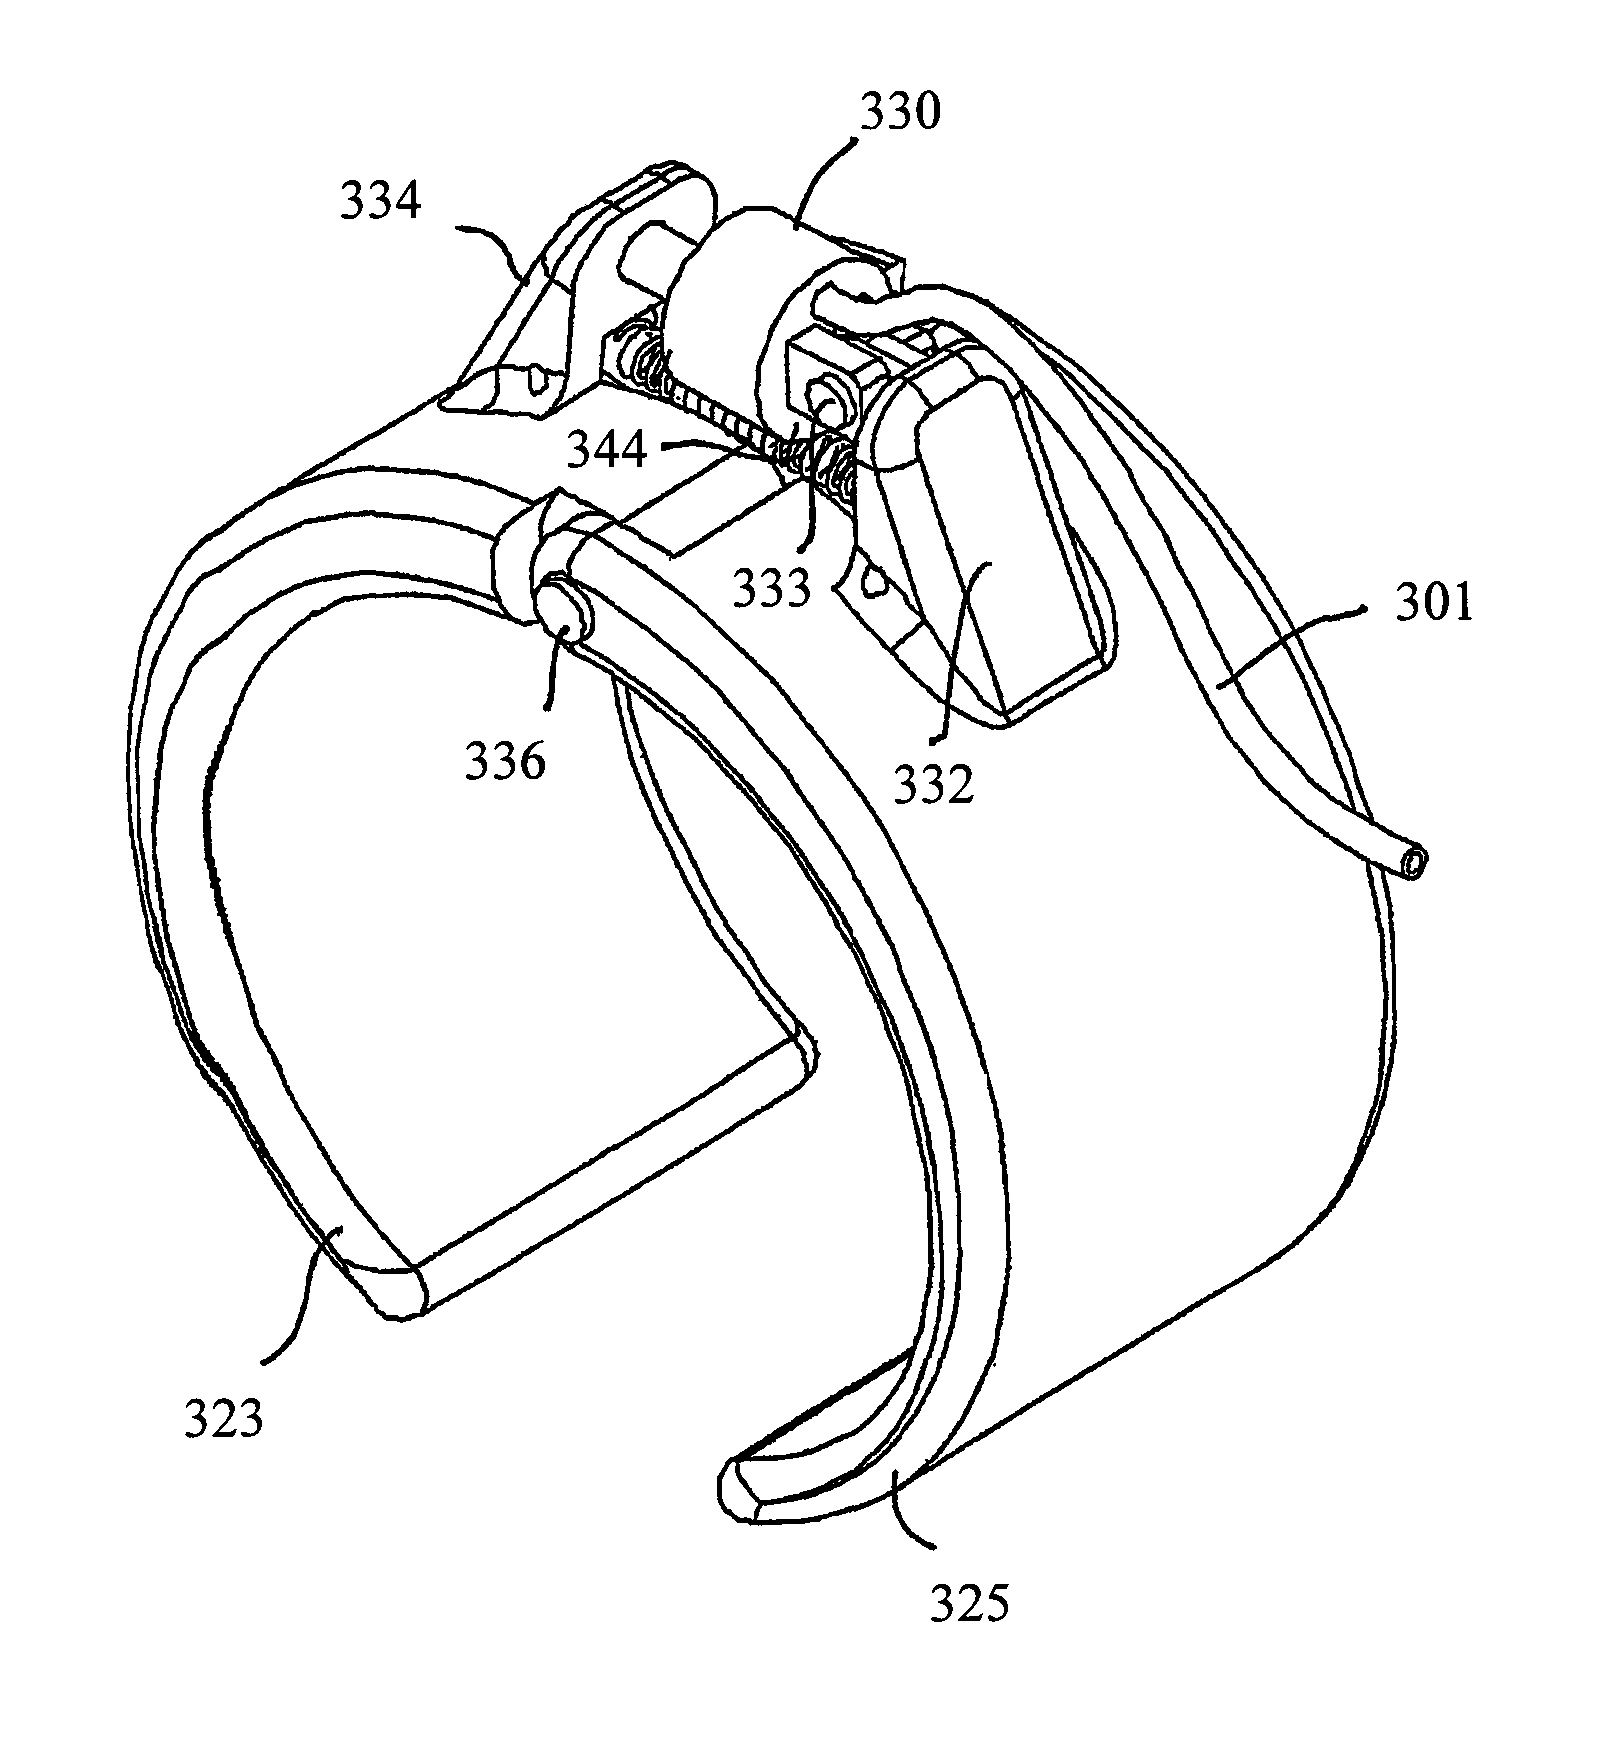 Portable device for the enhancement of circulation